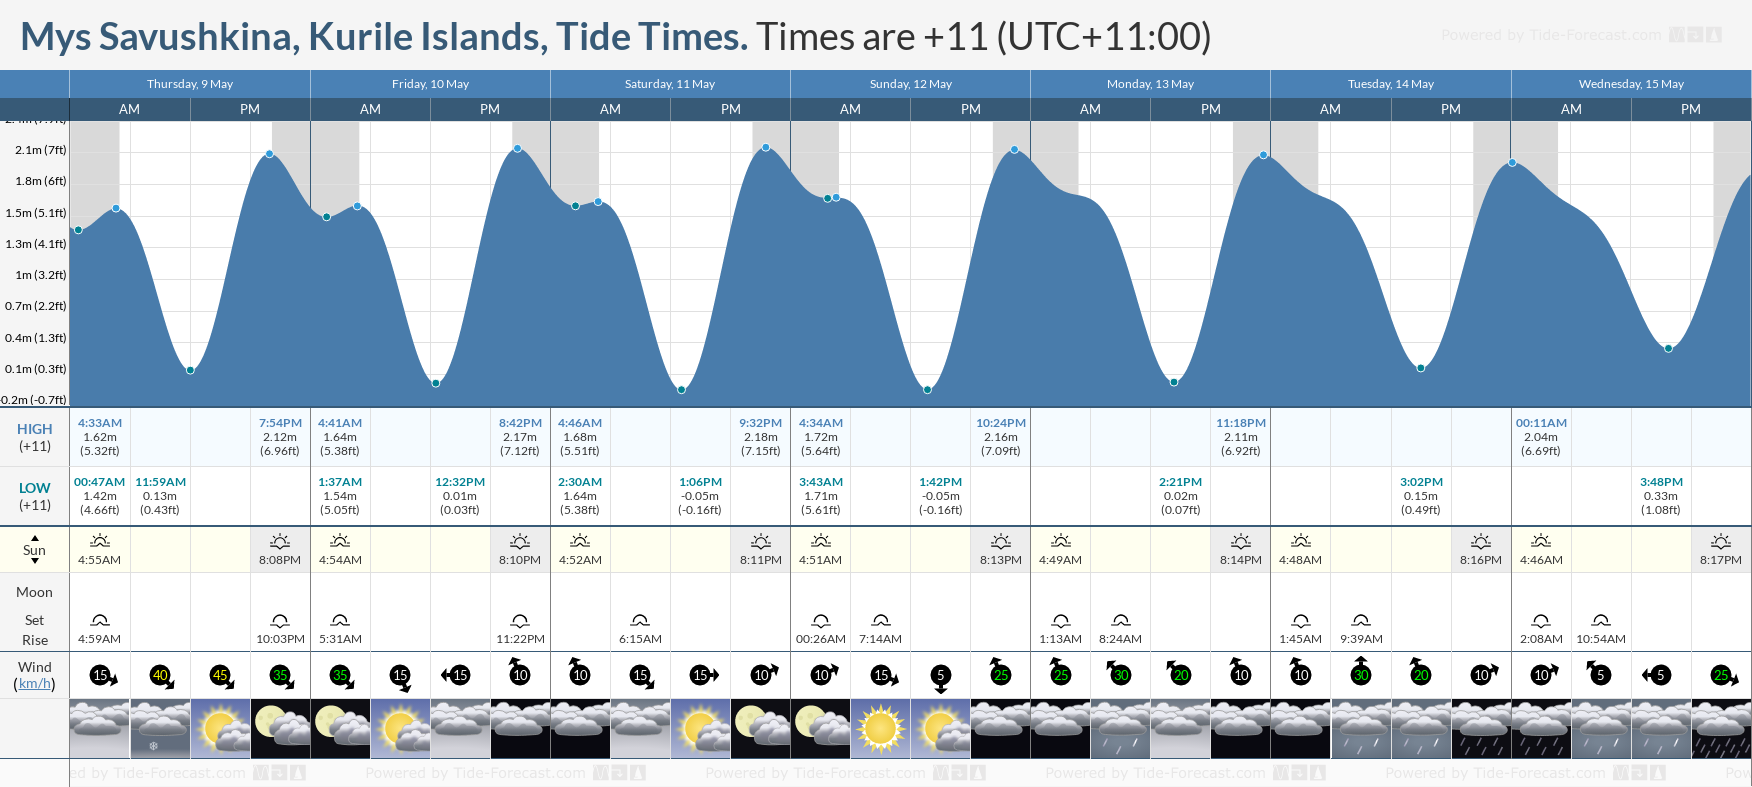 Mys Savushkina, Kurile Islands Tide Chart including high and low tide tide times for the next 7 days